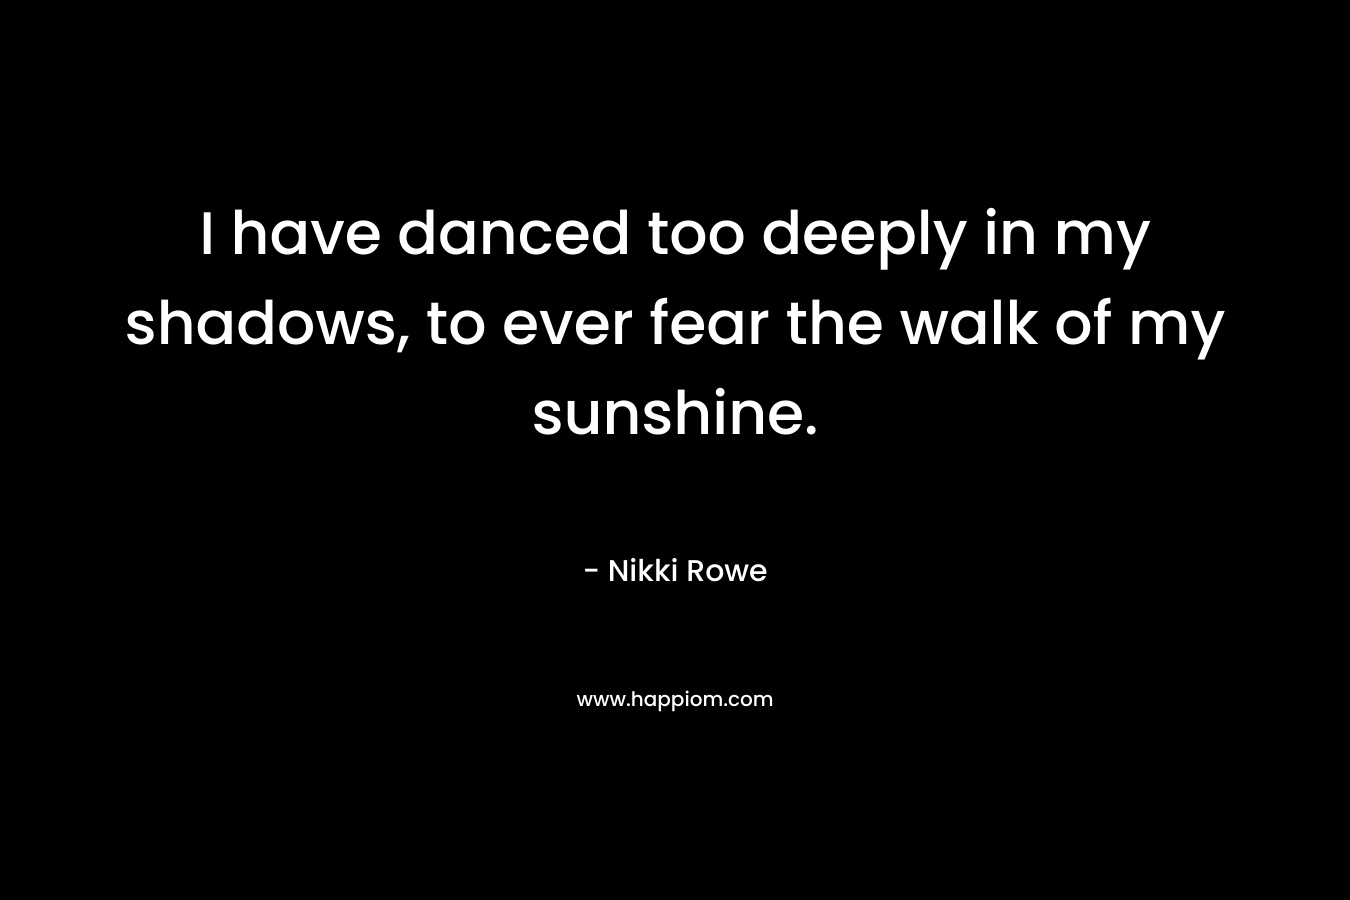 I have danced too deeply in my shadows, to ever fear the walk of my sunshine. – Nikki Rowe